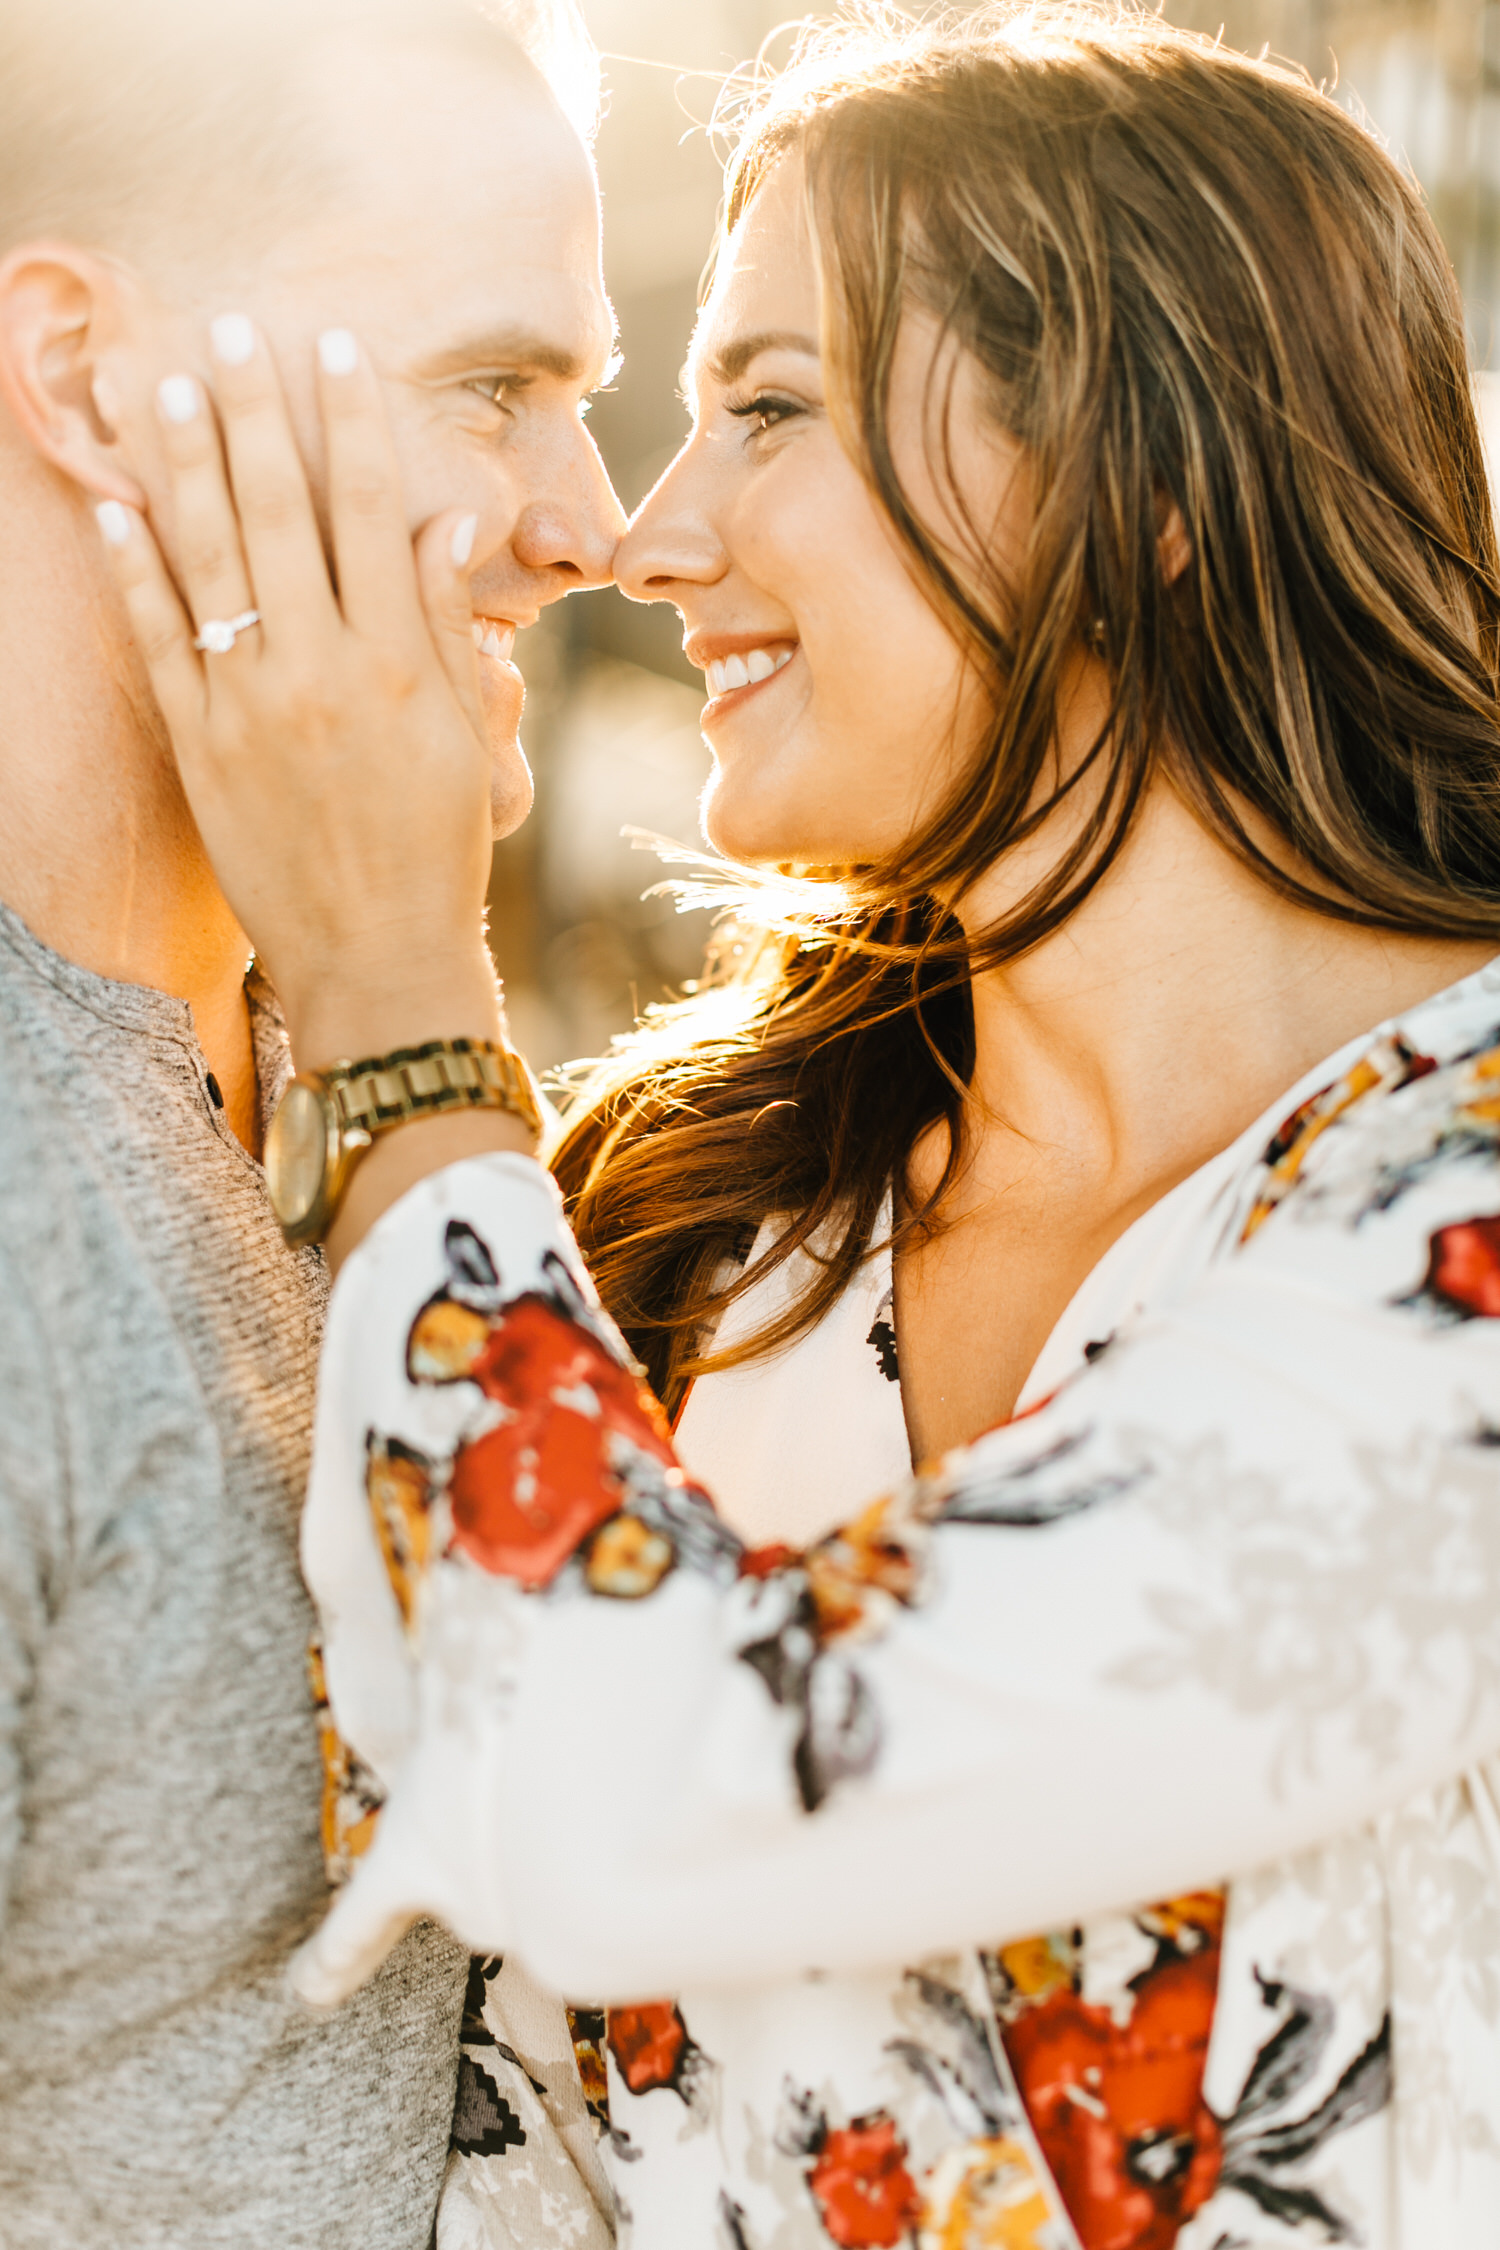 Palm Beach Engagement Photography